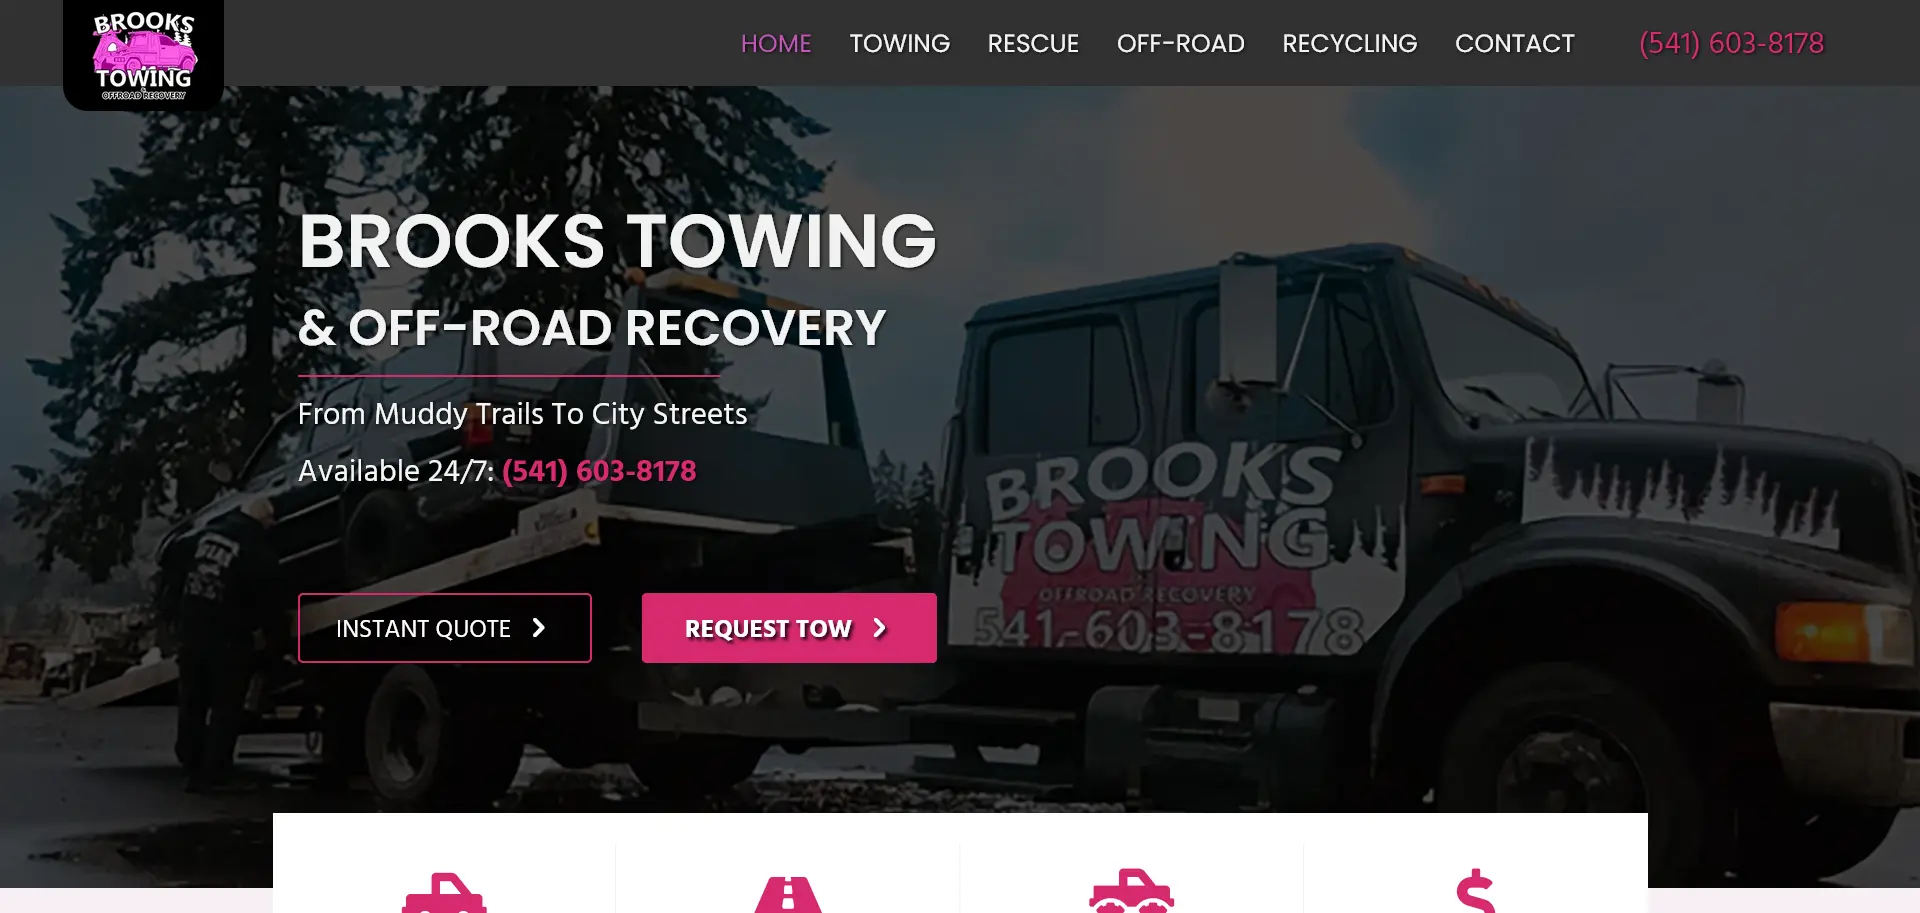 The website for Brooks Towing & Off-Road Recovery.